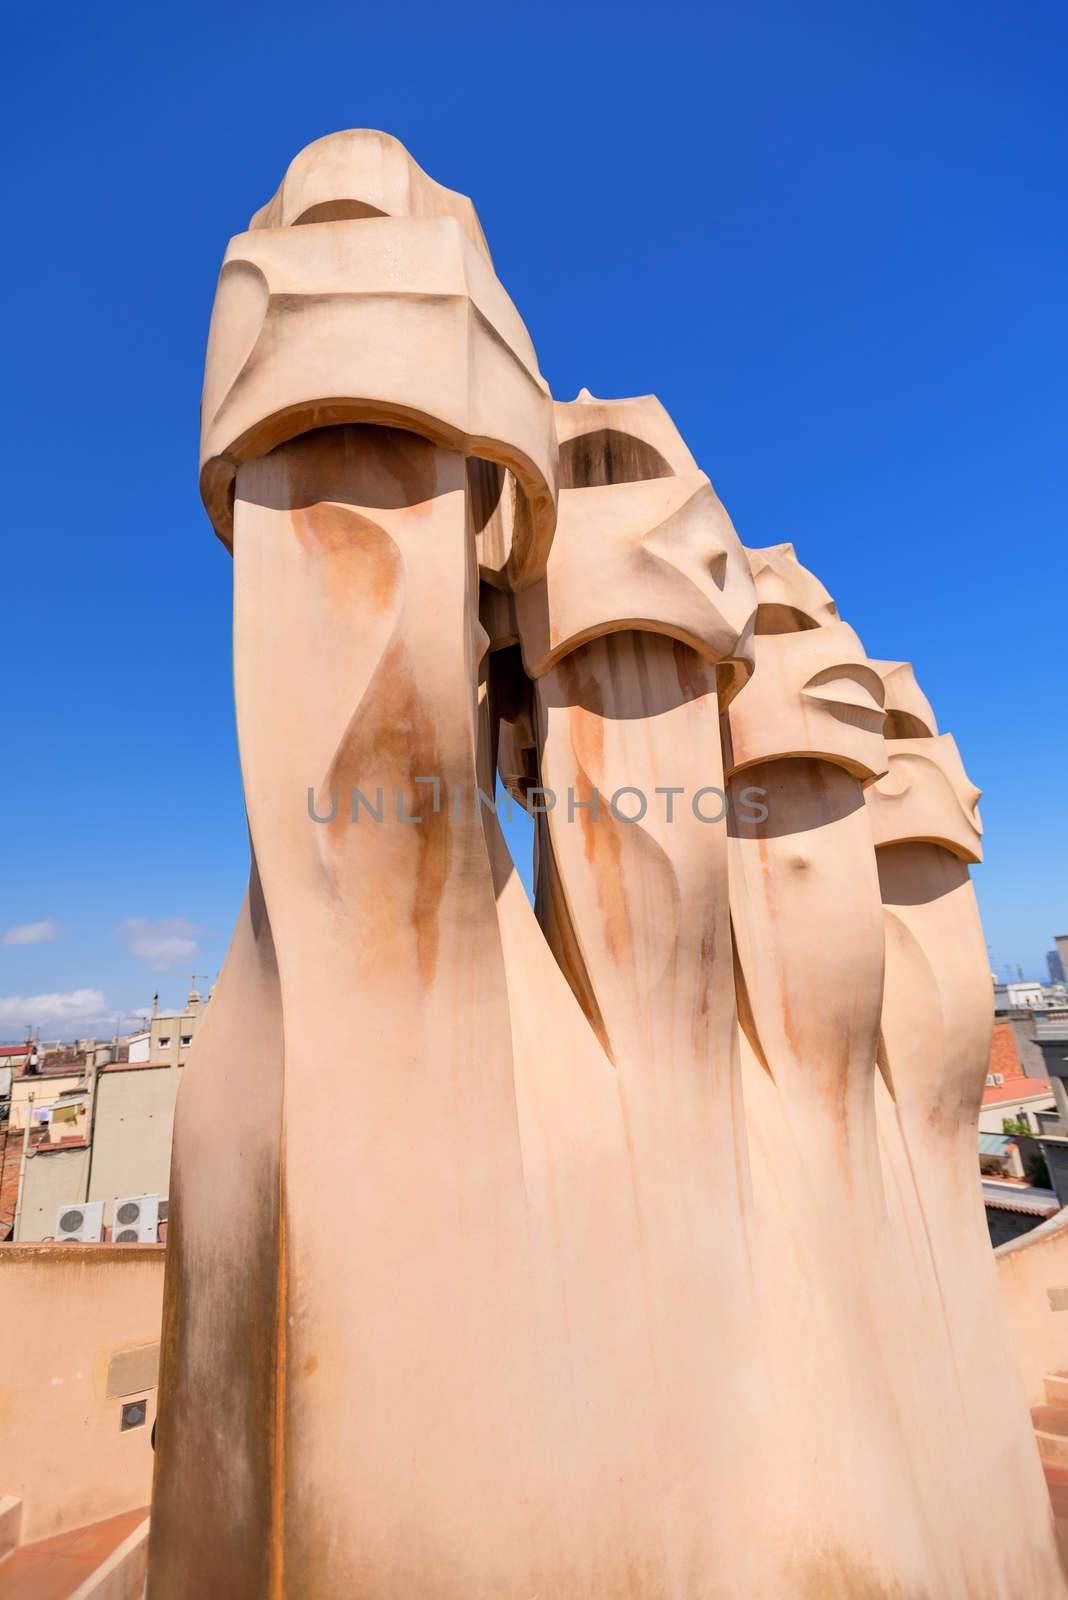 BARCELONA, JULY 19. Gaudi Chimneys statues at Casa Mila (also called La Pedrera) on July 19, 2012 in Barcelona. Terrace of the Casa Mila, with chimneys shaped anthropomorphic soldiers, created by Gaudi.